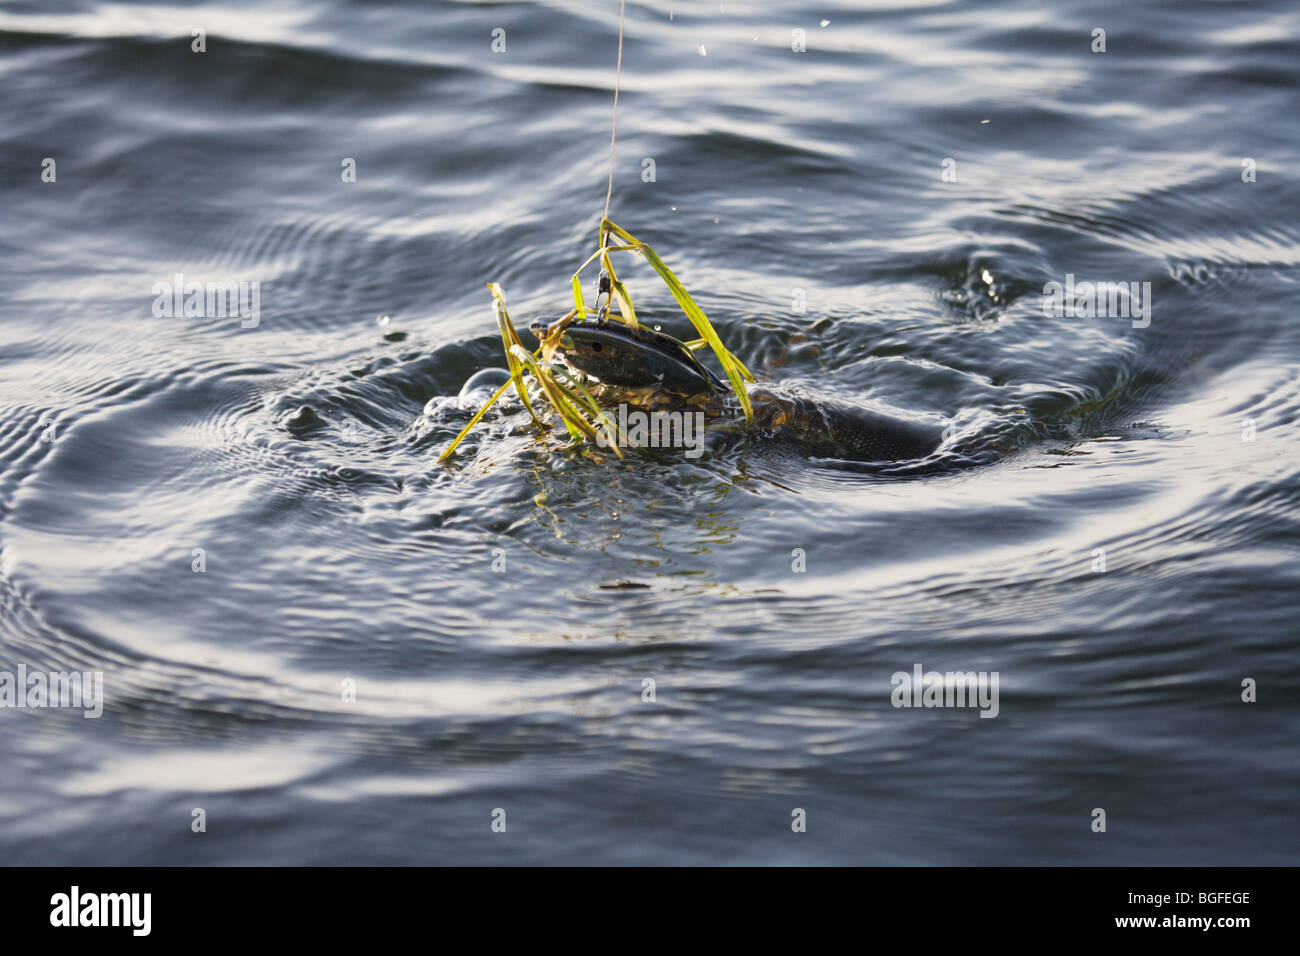 Northern Pike fish with grass and a fishing lure in mouth being landed in the water Stock Photo